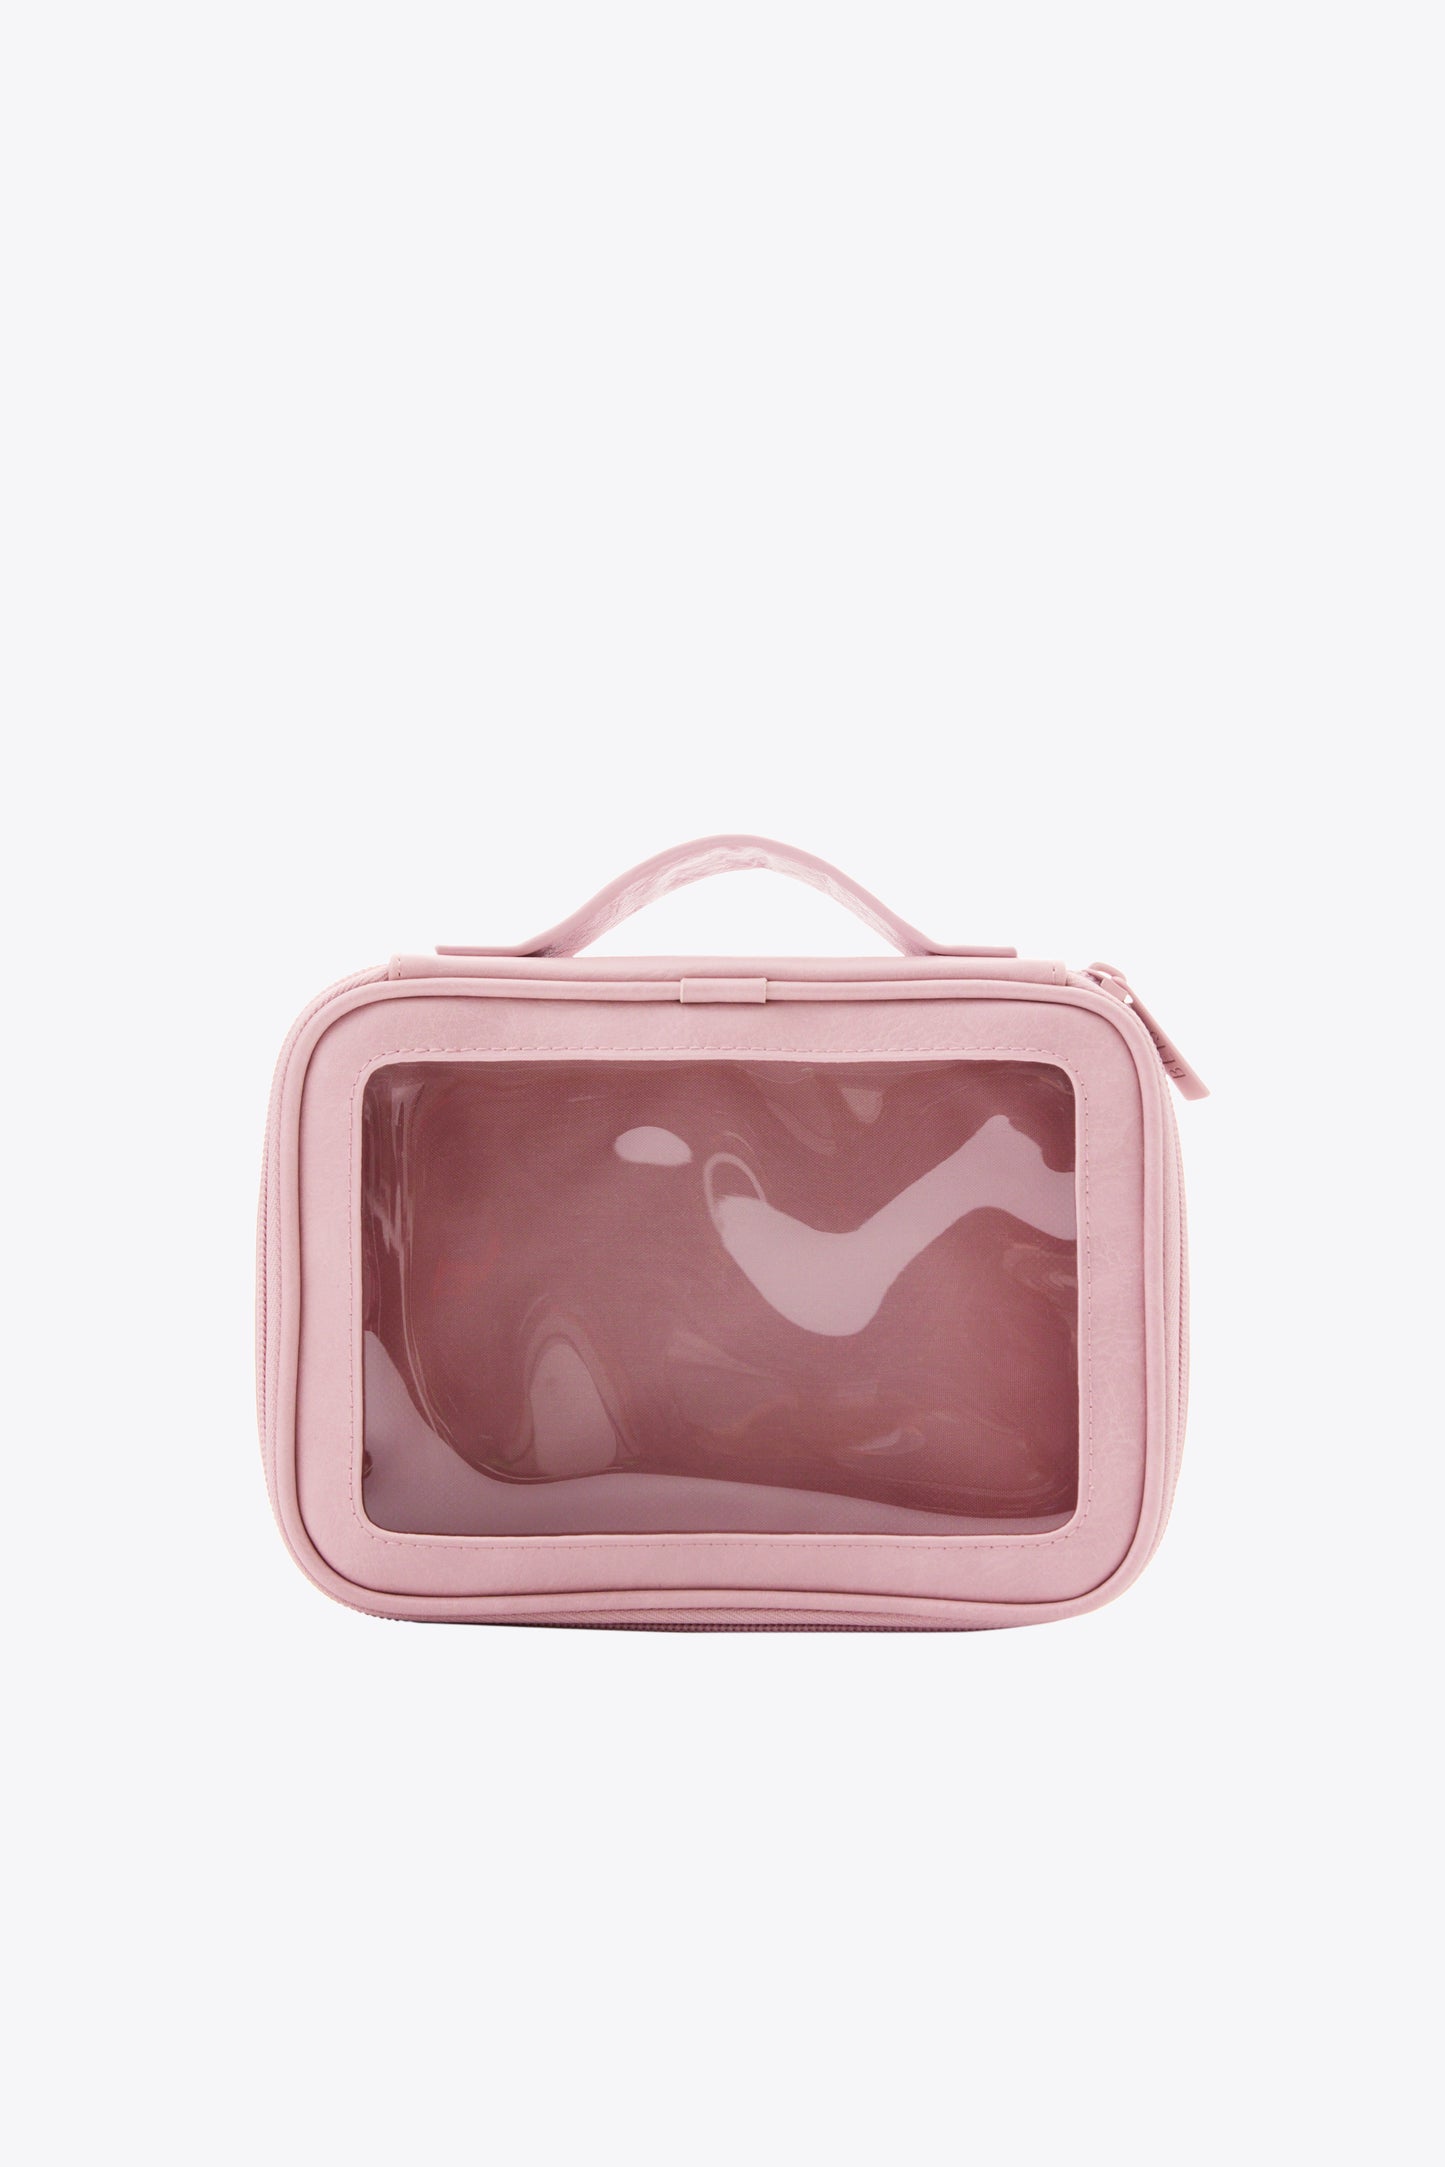 The On The Go Essential Case in Atlas Pink